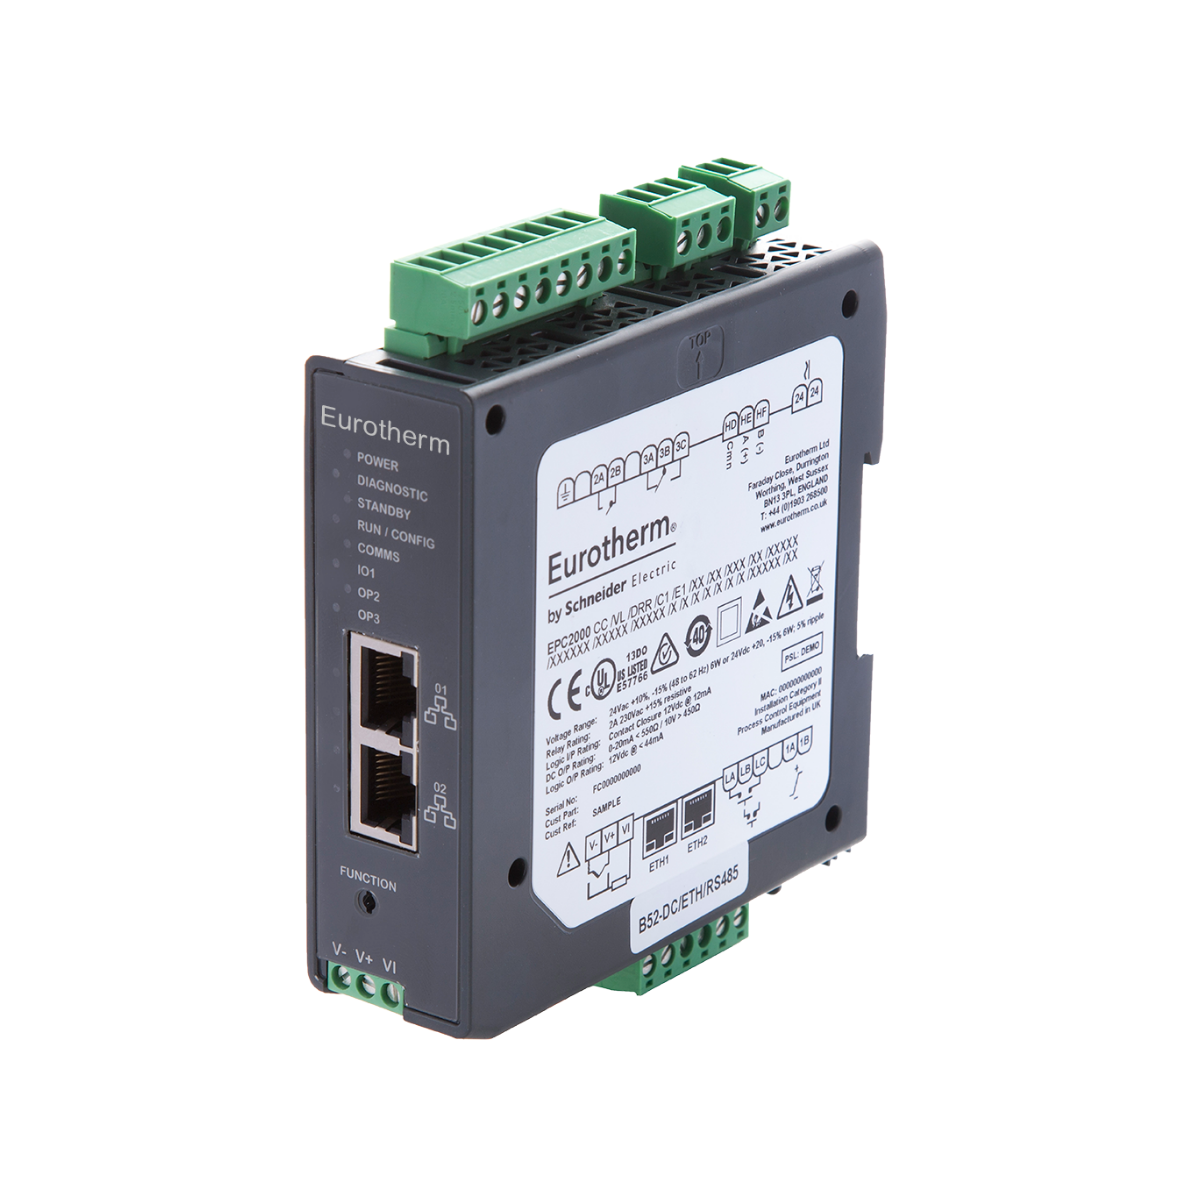 Eurotherm EPC2000 Series Process Controllers